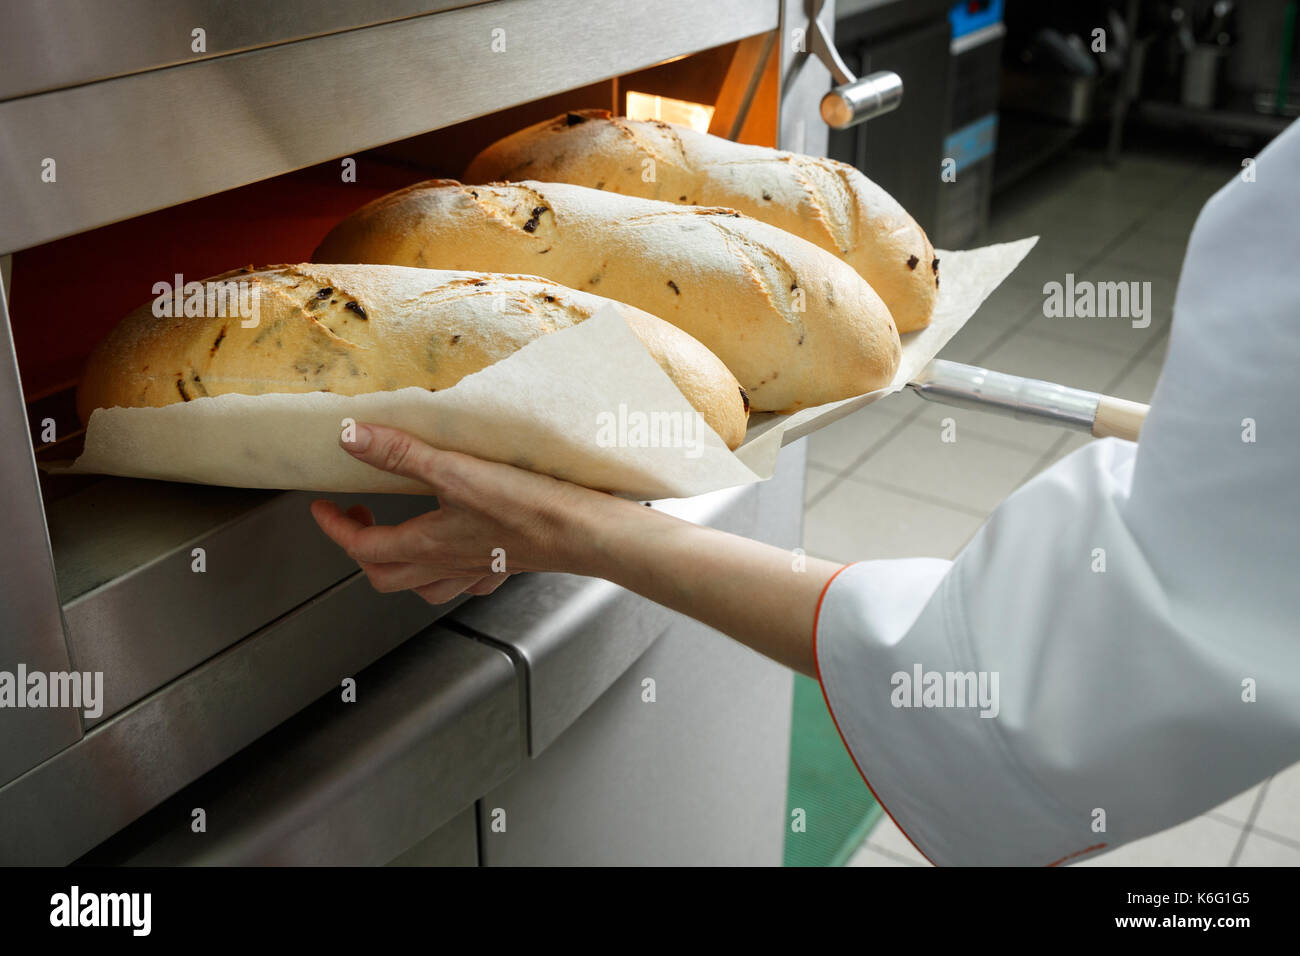 https://c8.alamy.com/comp/K6G1G5/hands-of-a-baker-getting-hot-bread-loafs-ot-of-the-oven-on-a-small-K6G1G5.jpg